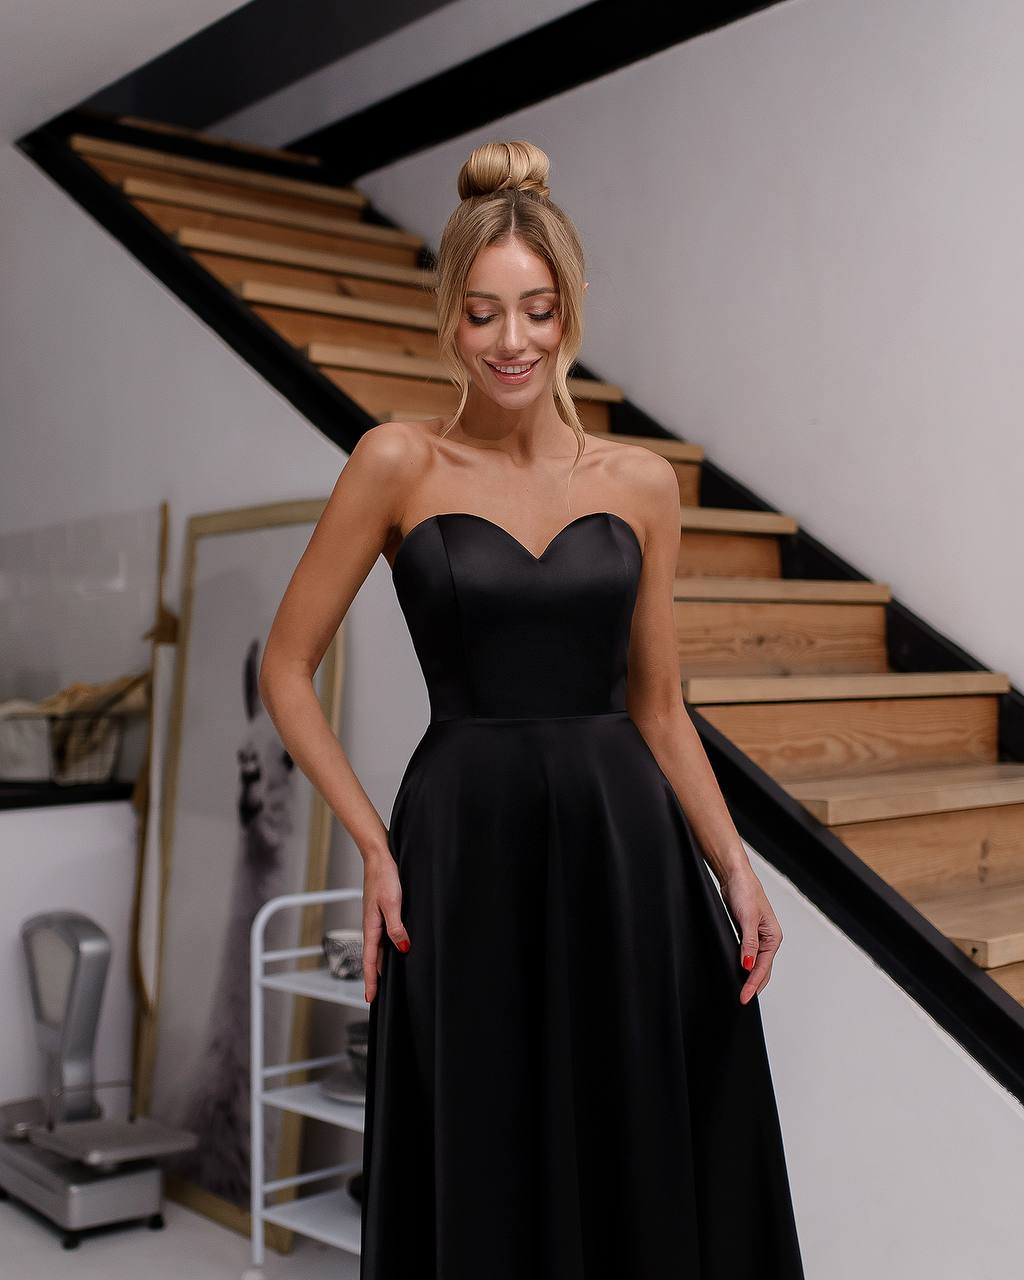 a woman in a black dress standing in front of a staircase